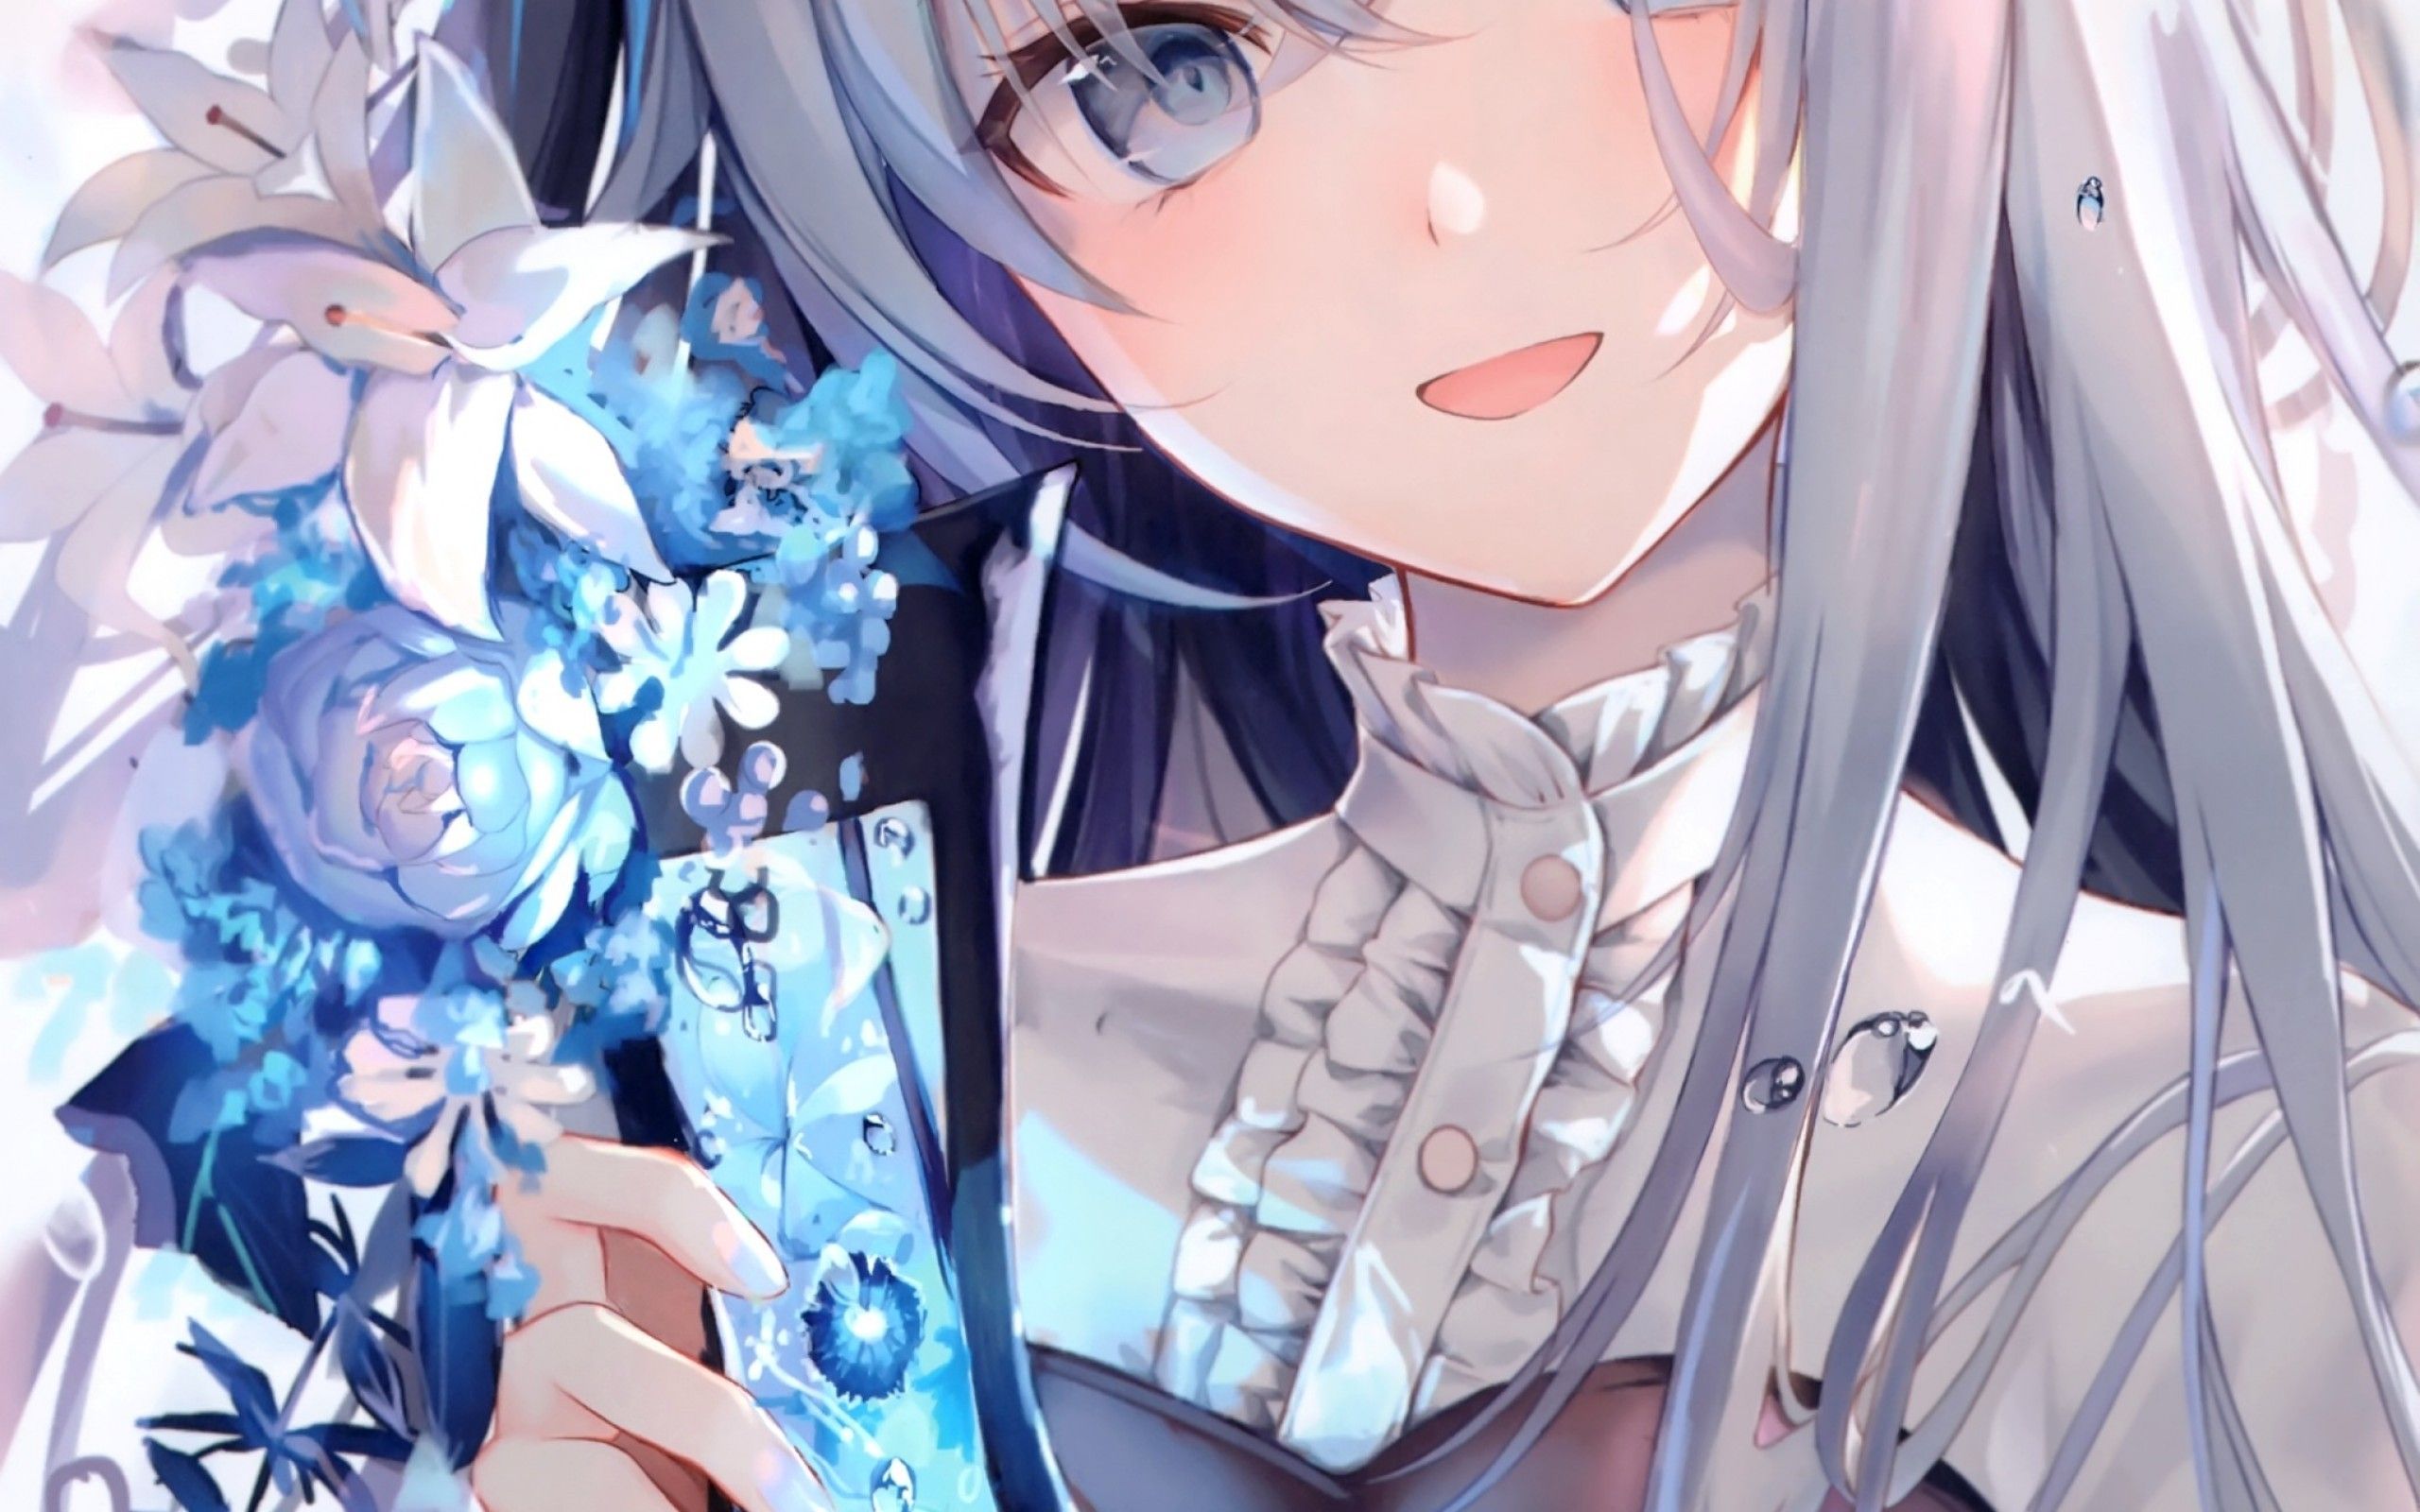 Download 2560x1600 Beautiful Anime Girl, Gray Hair, Smiling, Blue Flowers, Glass Shoe Wallpaper for MacBook Pro 13 inch